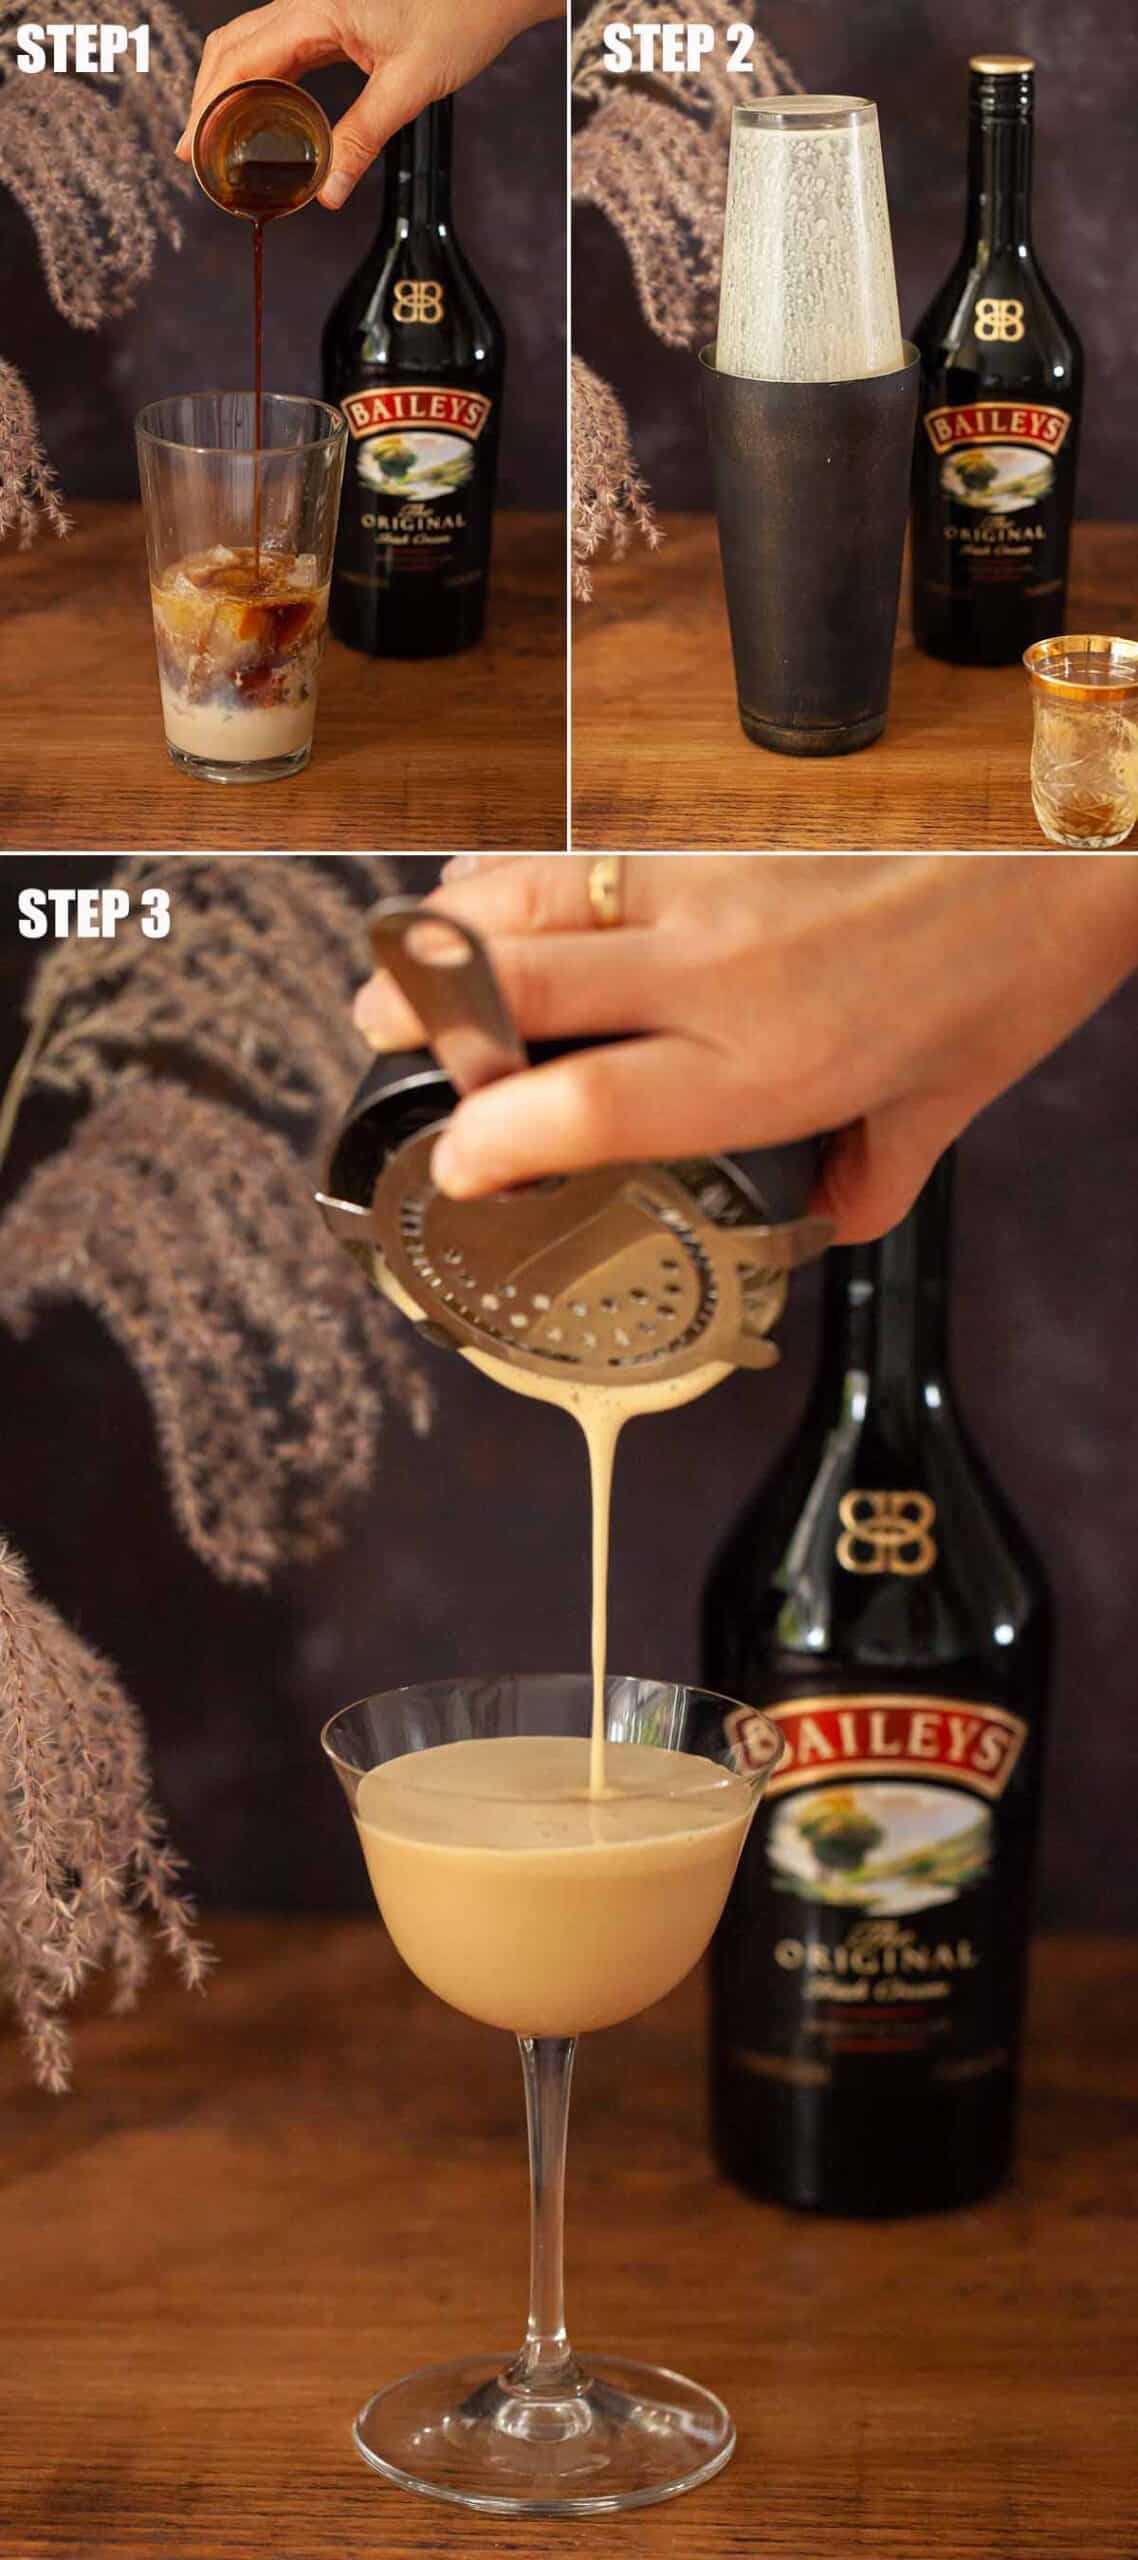 Collage of images showing a coffee cocktail being made.